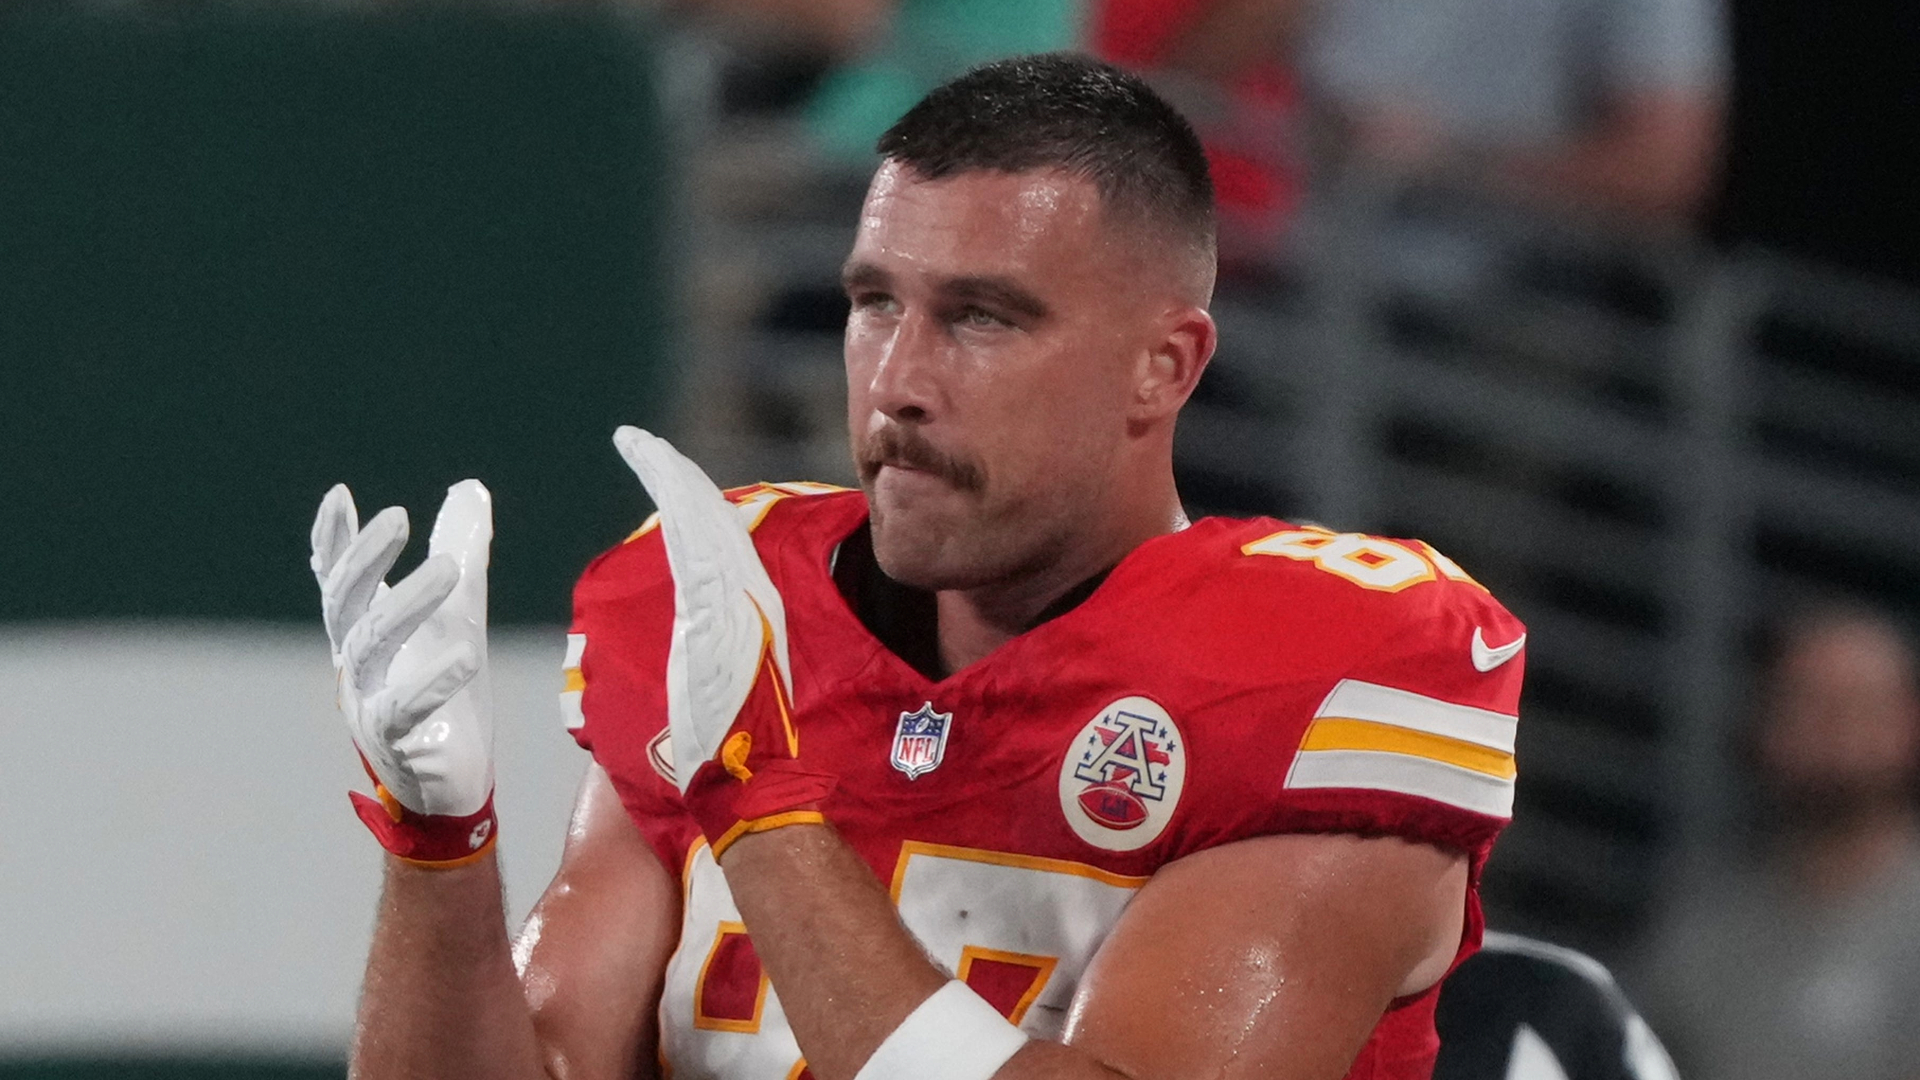 Travis Kelce Responds Perfectly To Aaron Rodgers’ ‘Mr. Pfizer’
Dig